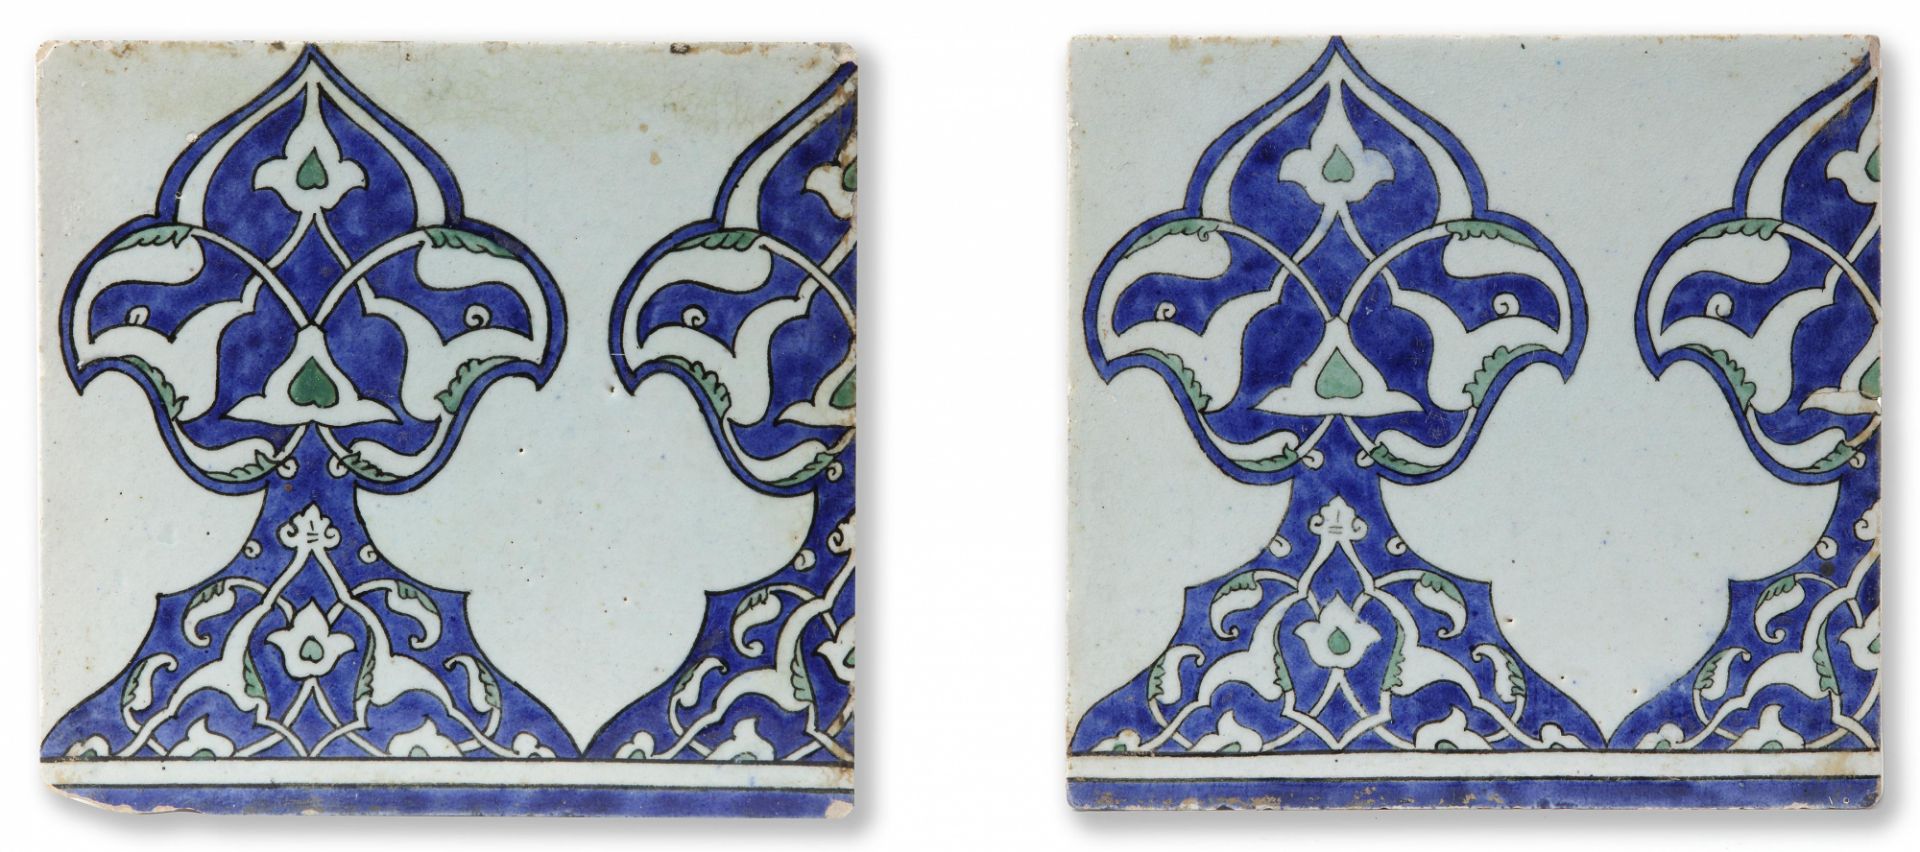 A PAIR OF DAMASCUS UNDERGLAZE PAINTED POTTERY BORDER TILES, SYRIA, 17TH CENTURY - Image 6 of 6